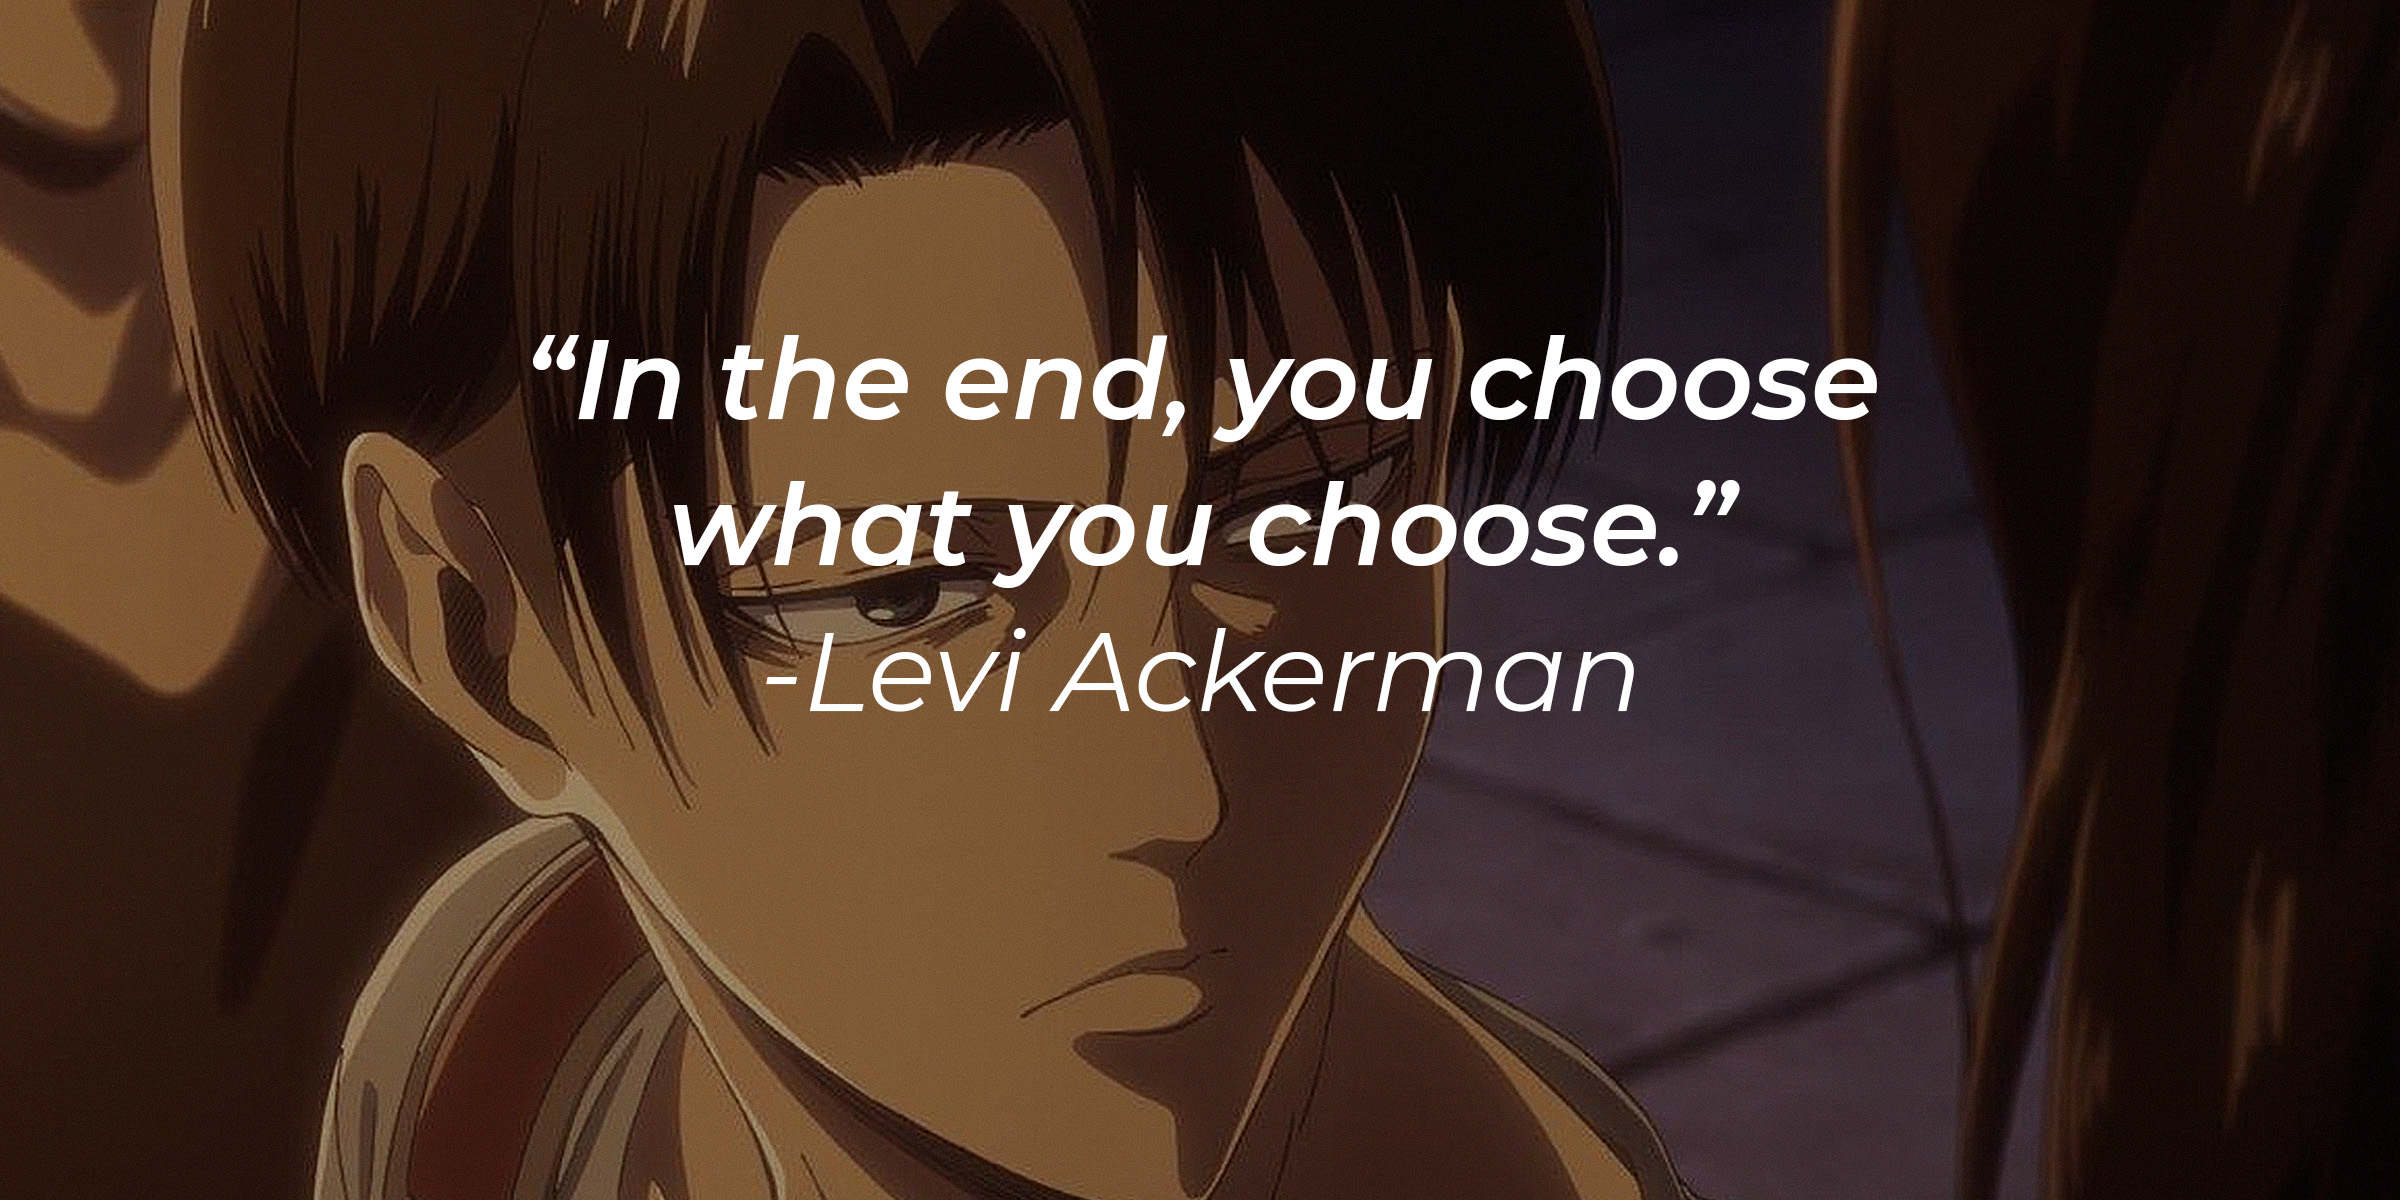 Levi Ackerman, with his quote: "In the end, you choose what you choose." │Source: facebook.com/AttackOnTitan